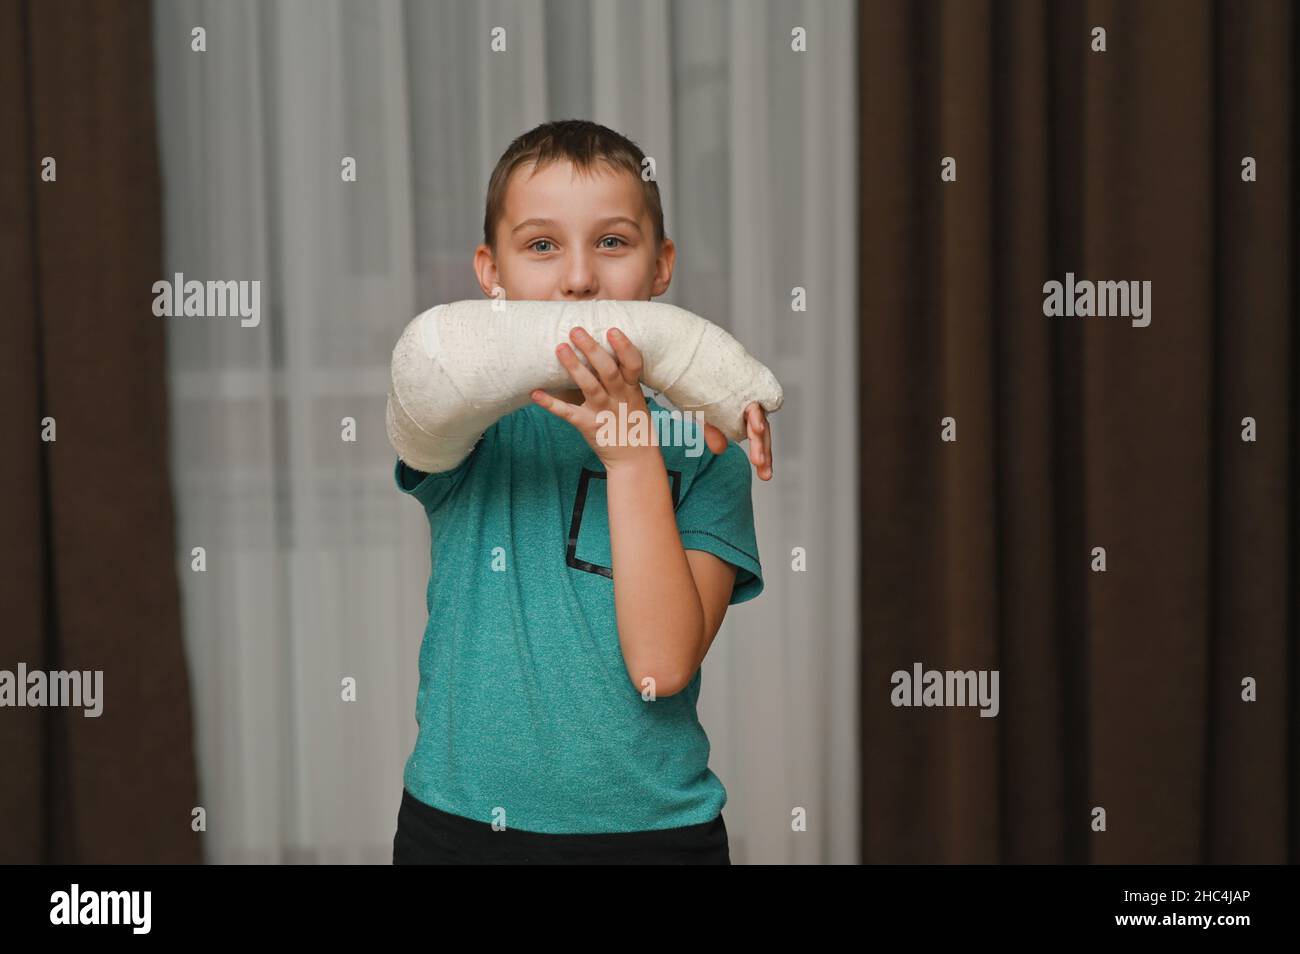 the boy's arm is in a cast. a child with a broken arm. Stock Photo